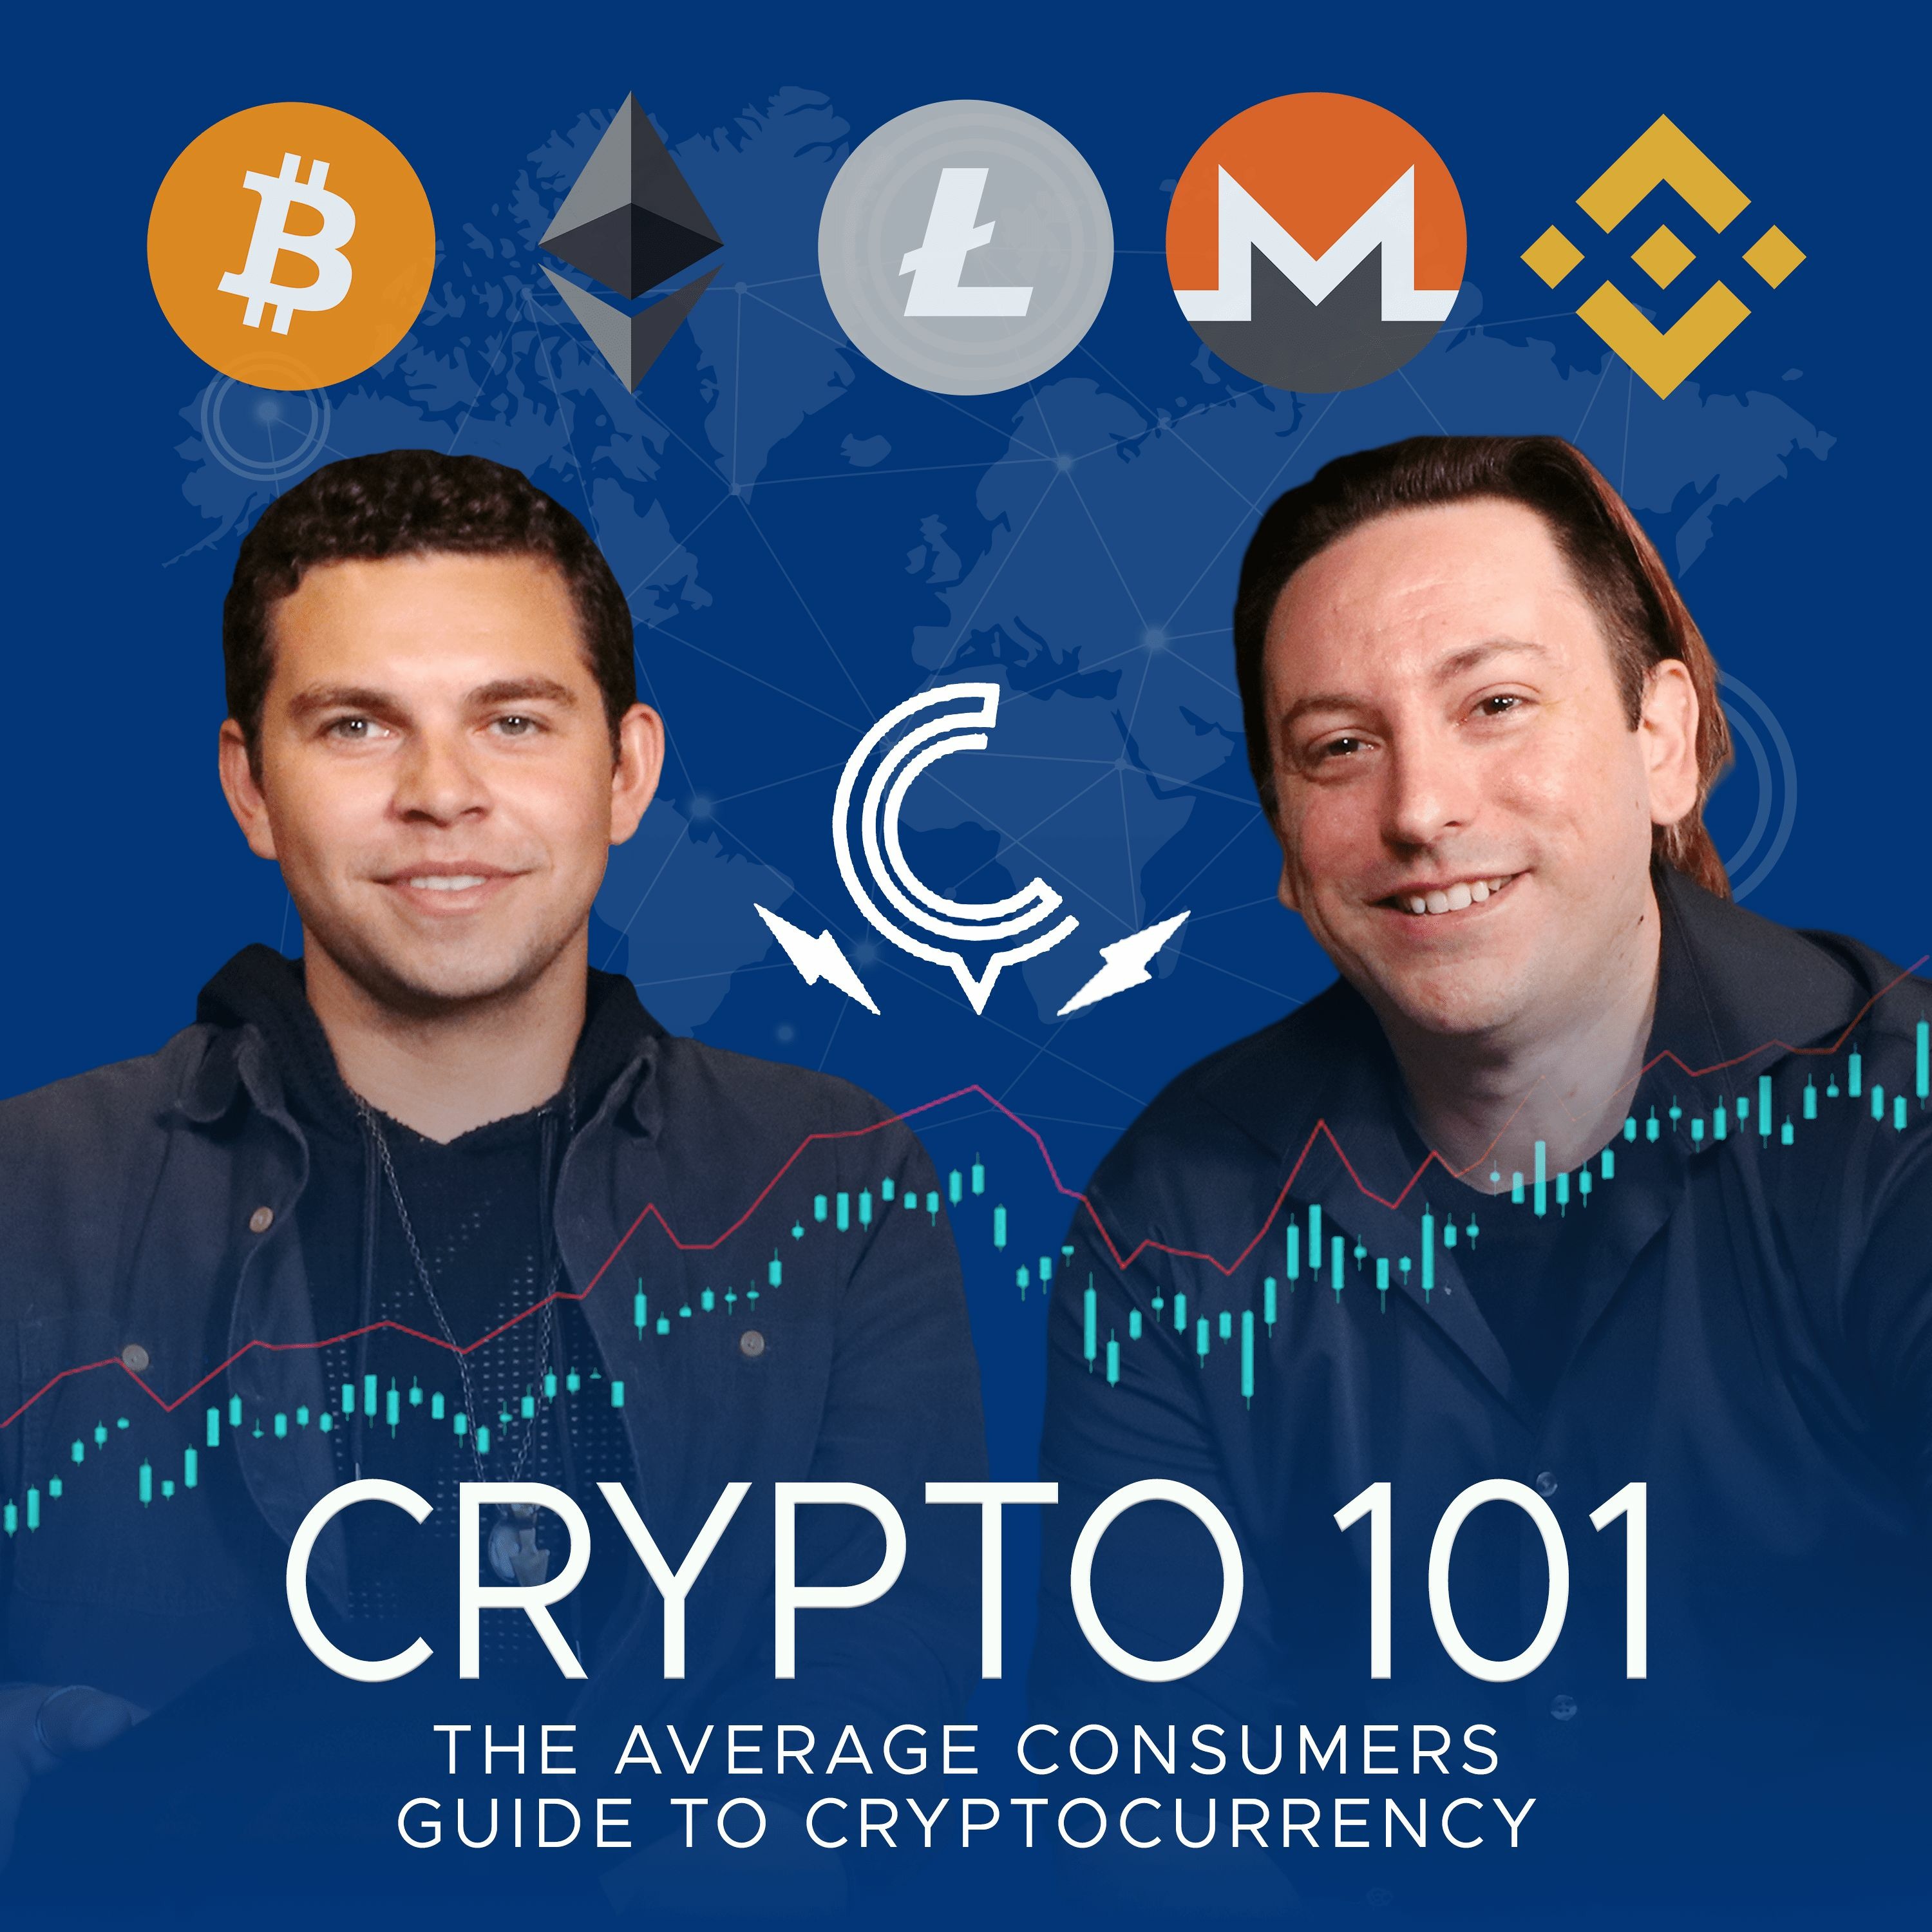 Ep. 299 - ”Why I Left Amazon to Go All-in on Crypto”, w/ Bittrex CEO Bill Shihara